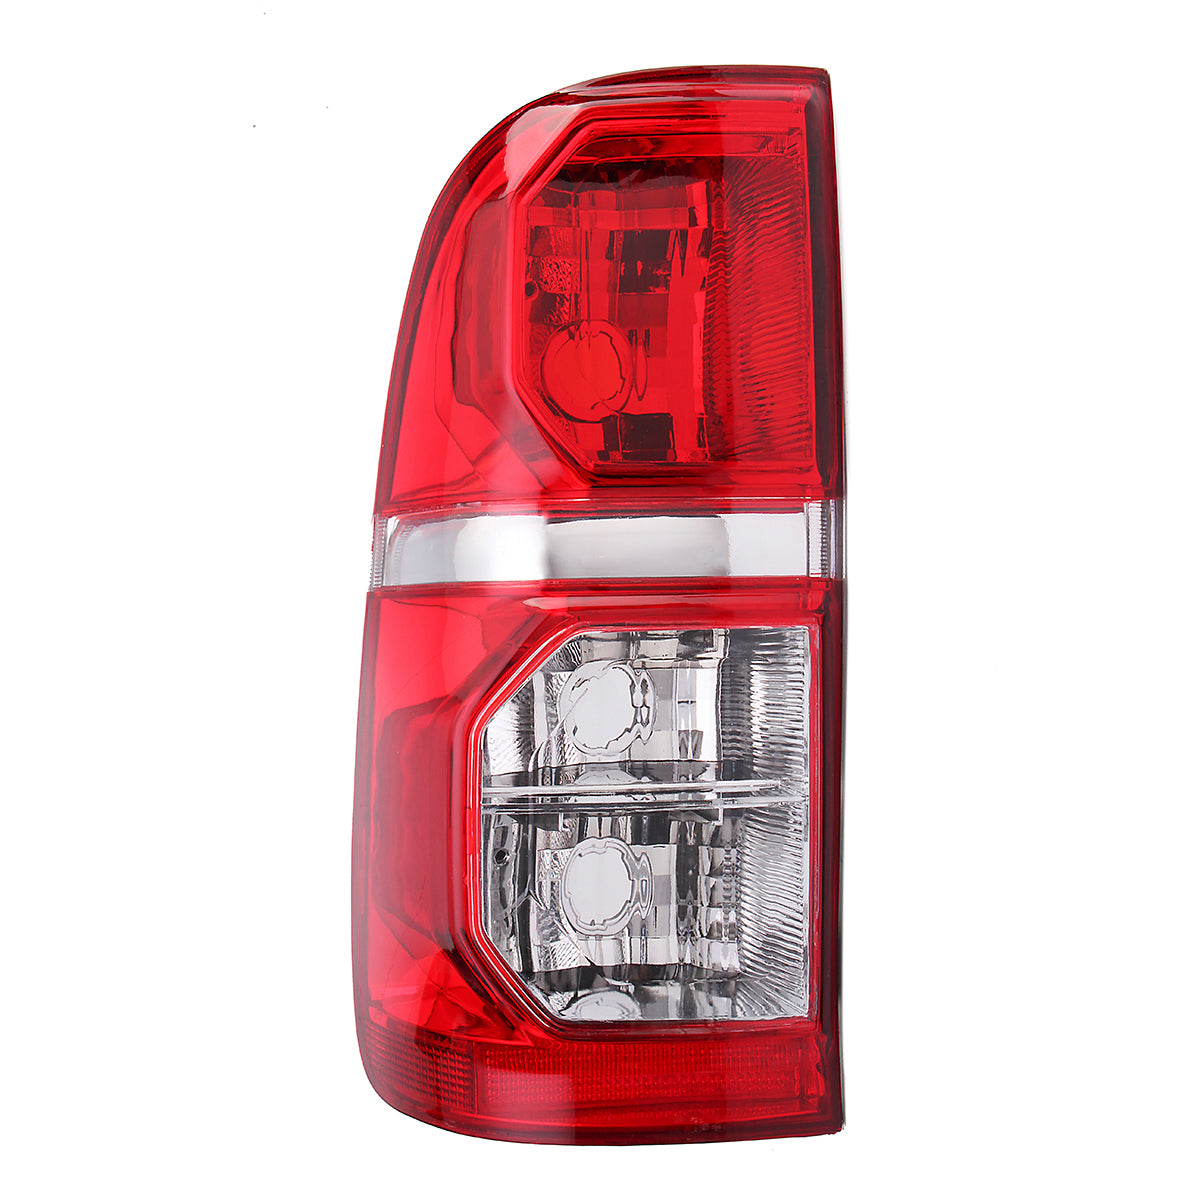 Tomato Car Rear Left/Right Tail Light Brake Lamp Red withou Bulb For Toyota Hilux 2005-2015